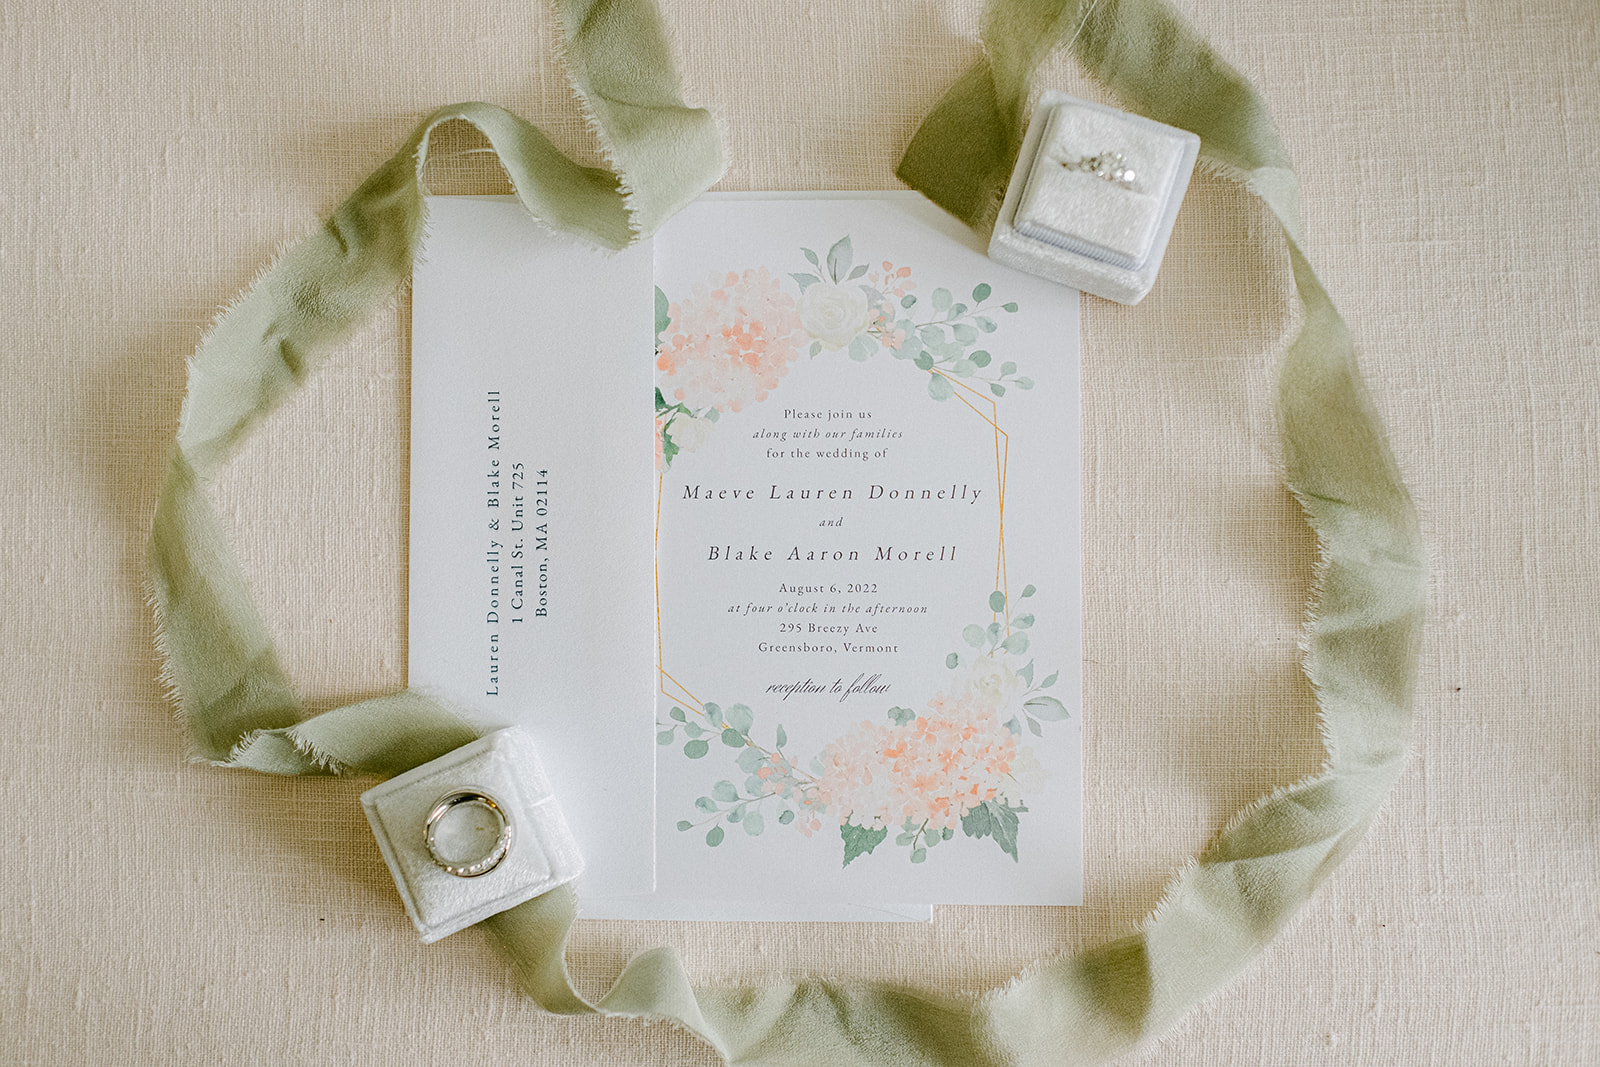 Wedding Invitations from the Knot